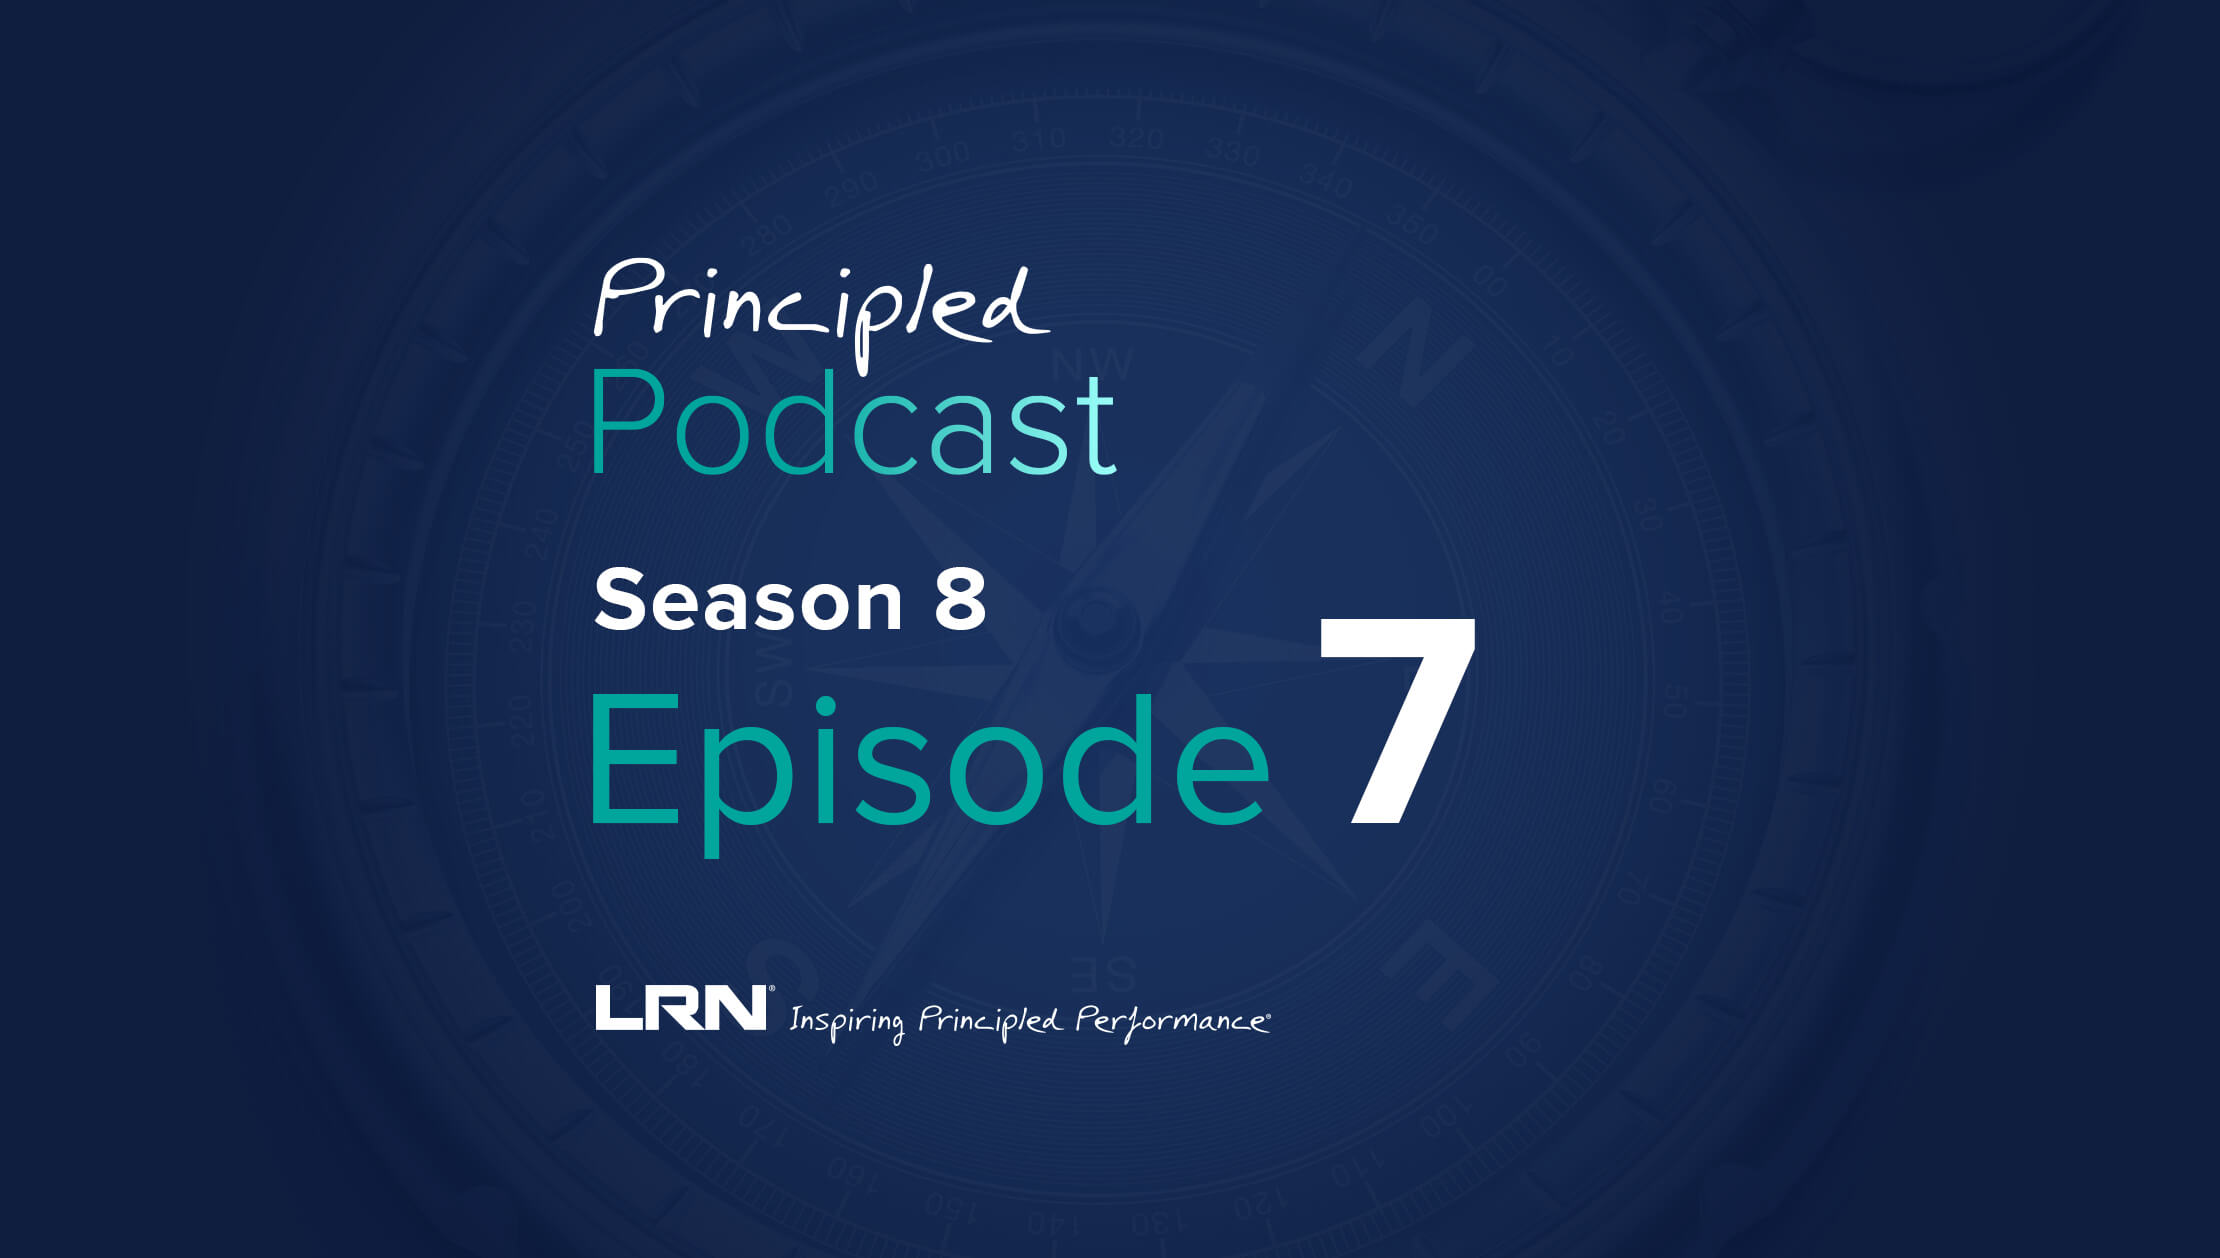 LRN Principled Podcast Season 8 Episode 7 – How does DOJ policy and guidance affect E&C programs?